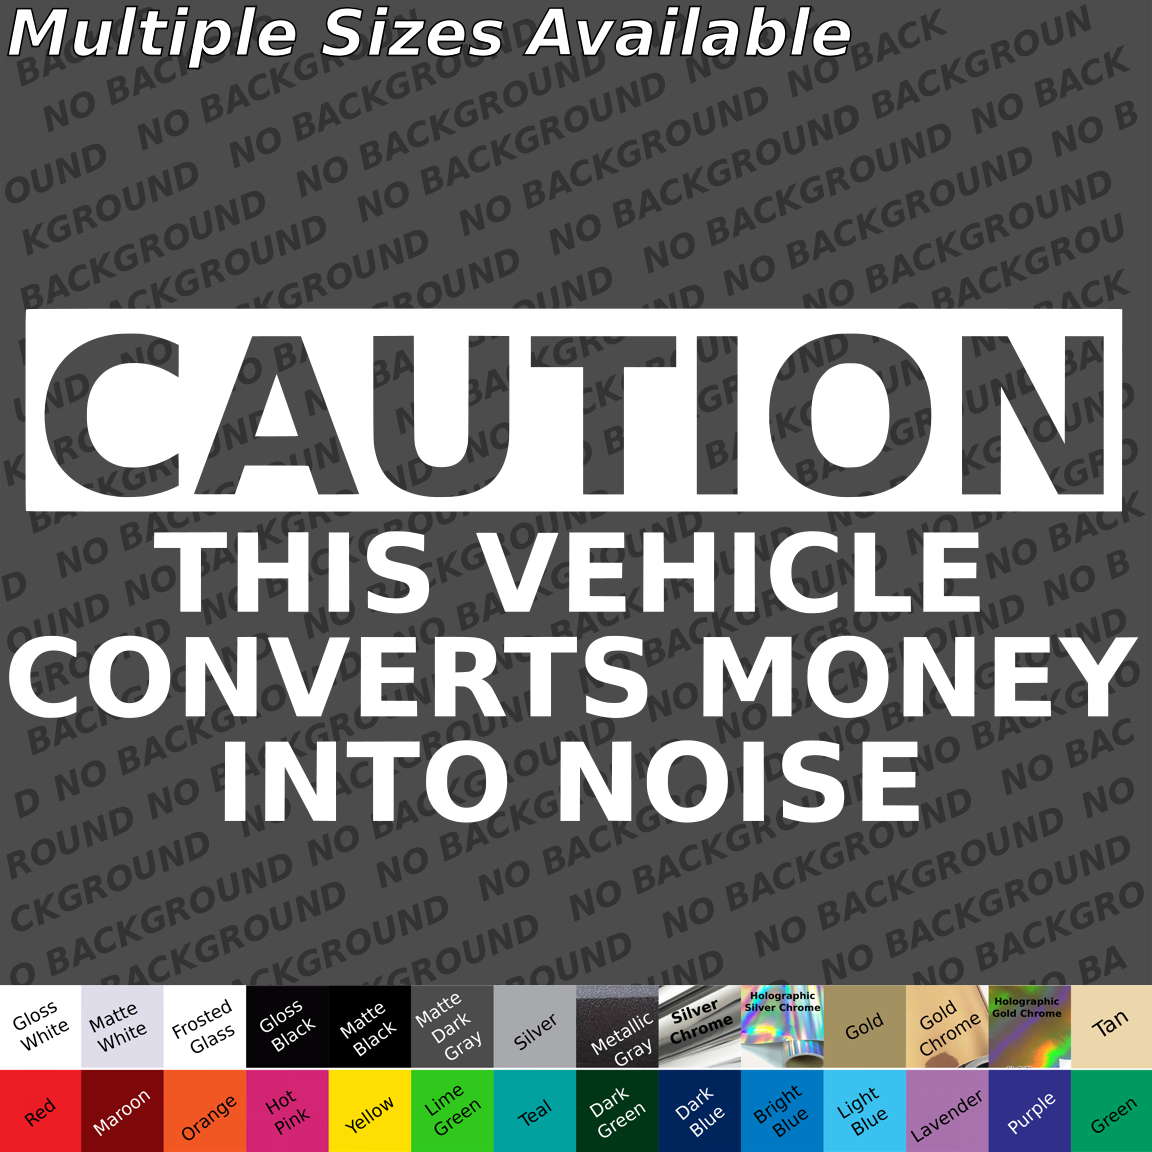 Caution this vehicle converts money to noise custom decal sticker diesel loud